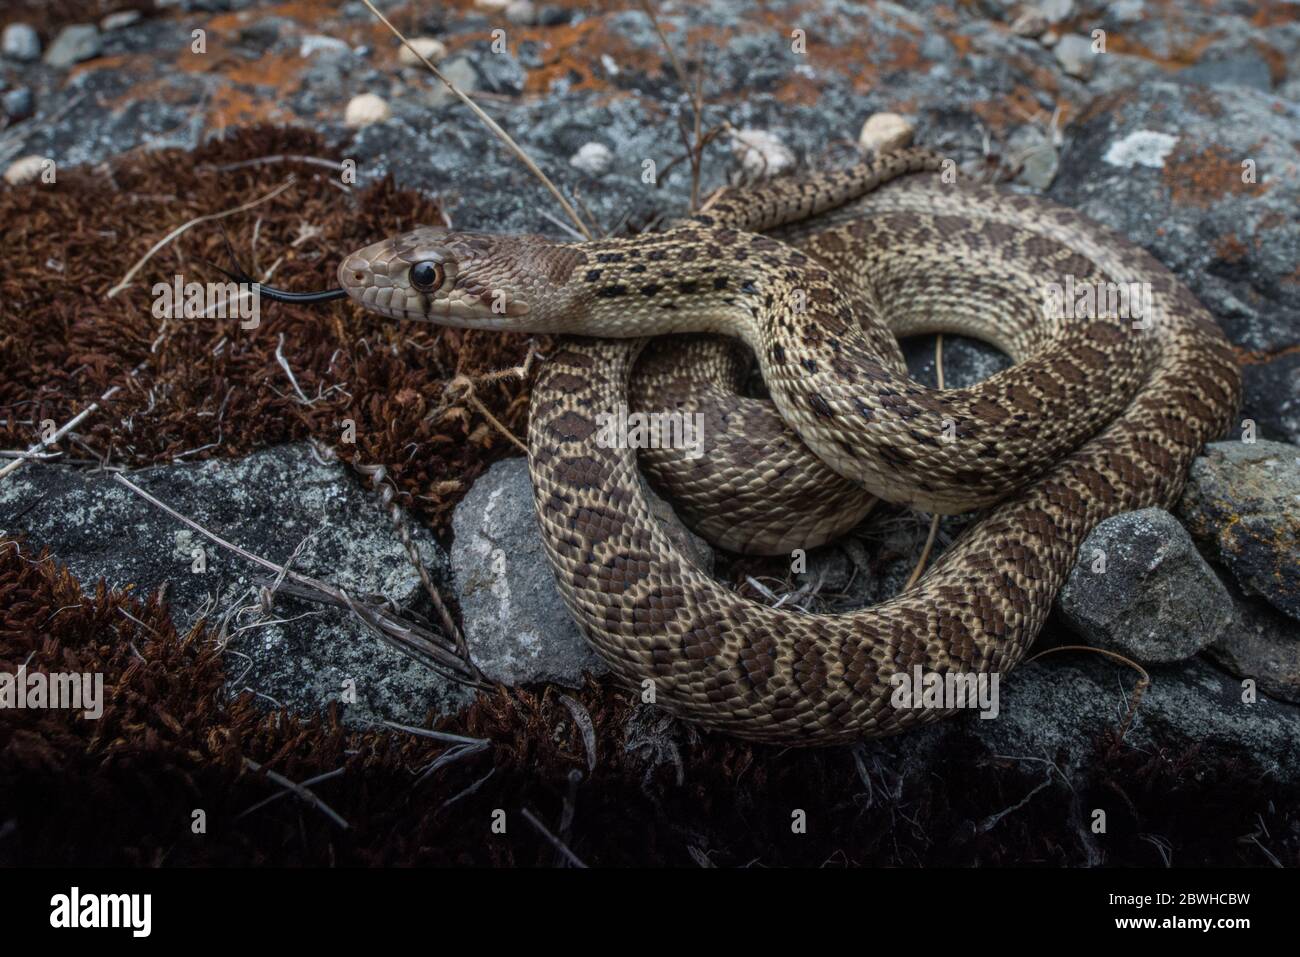 A juvenile gopher snake (Pituophis catenifer) still so young that it has its juvenile coloration and pattern.  From Marin county, California. Stock Photo